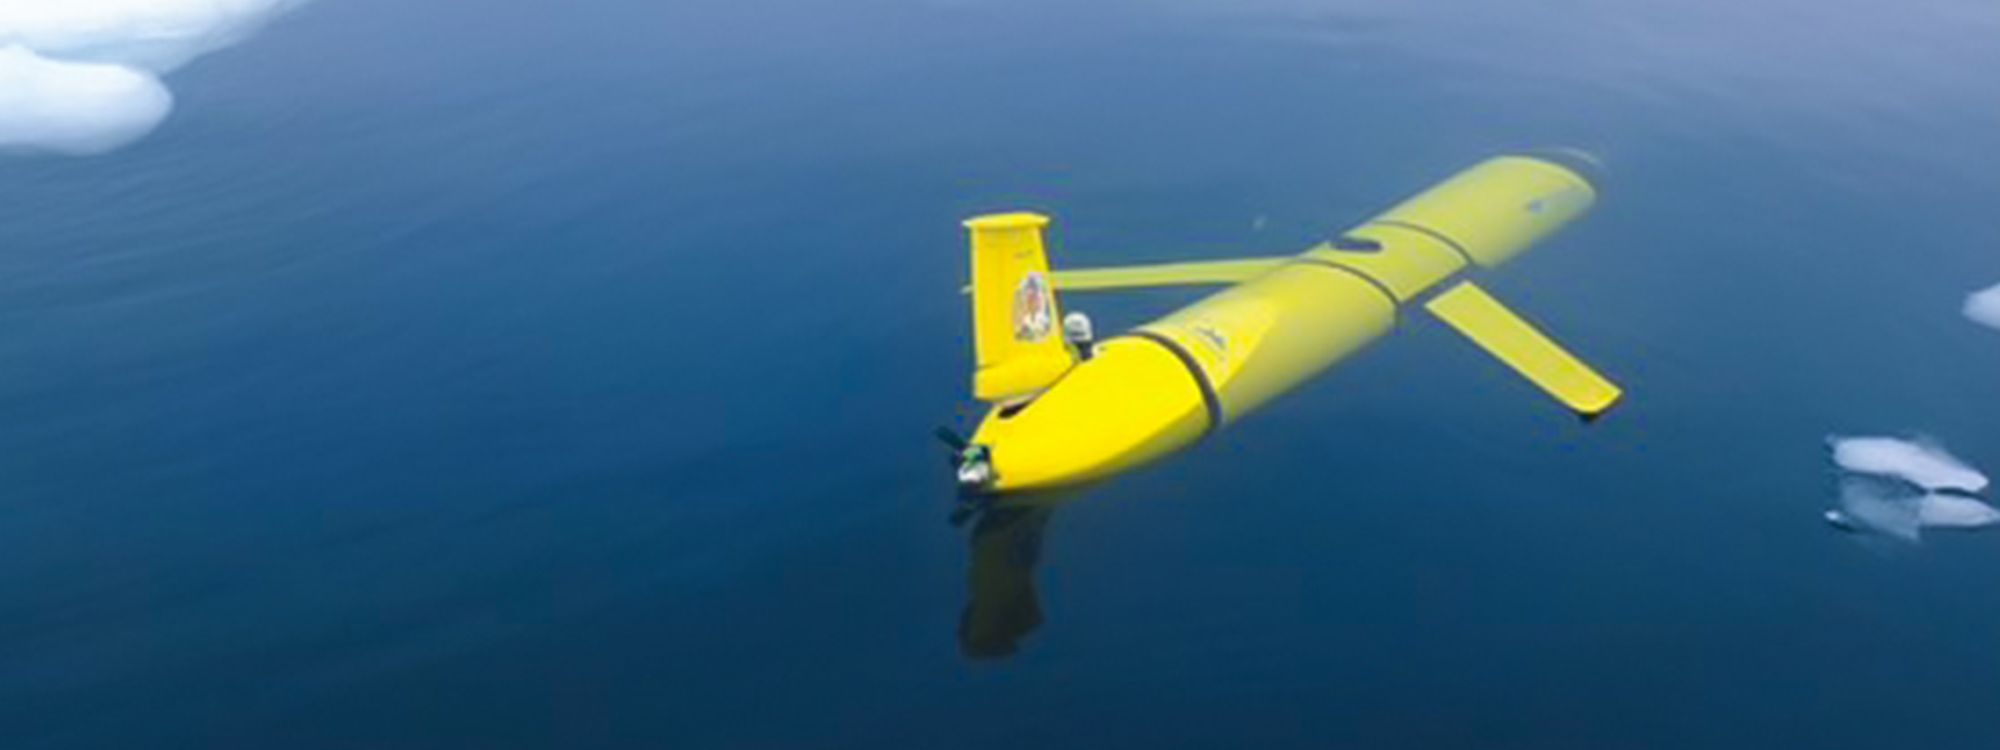 Underwater gliders could soon run off of the ocean’s changing temperatures